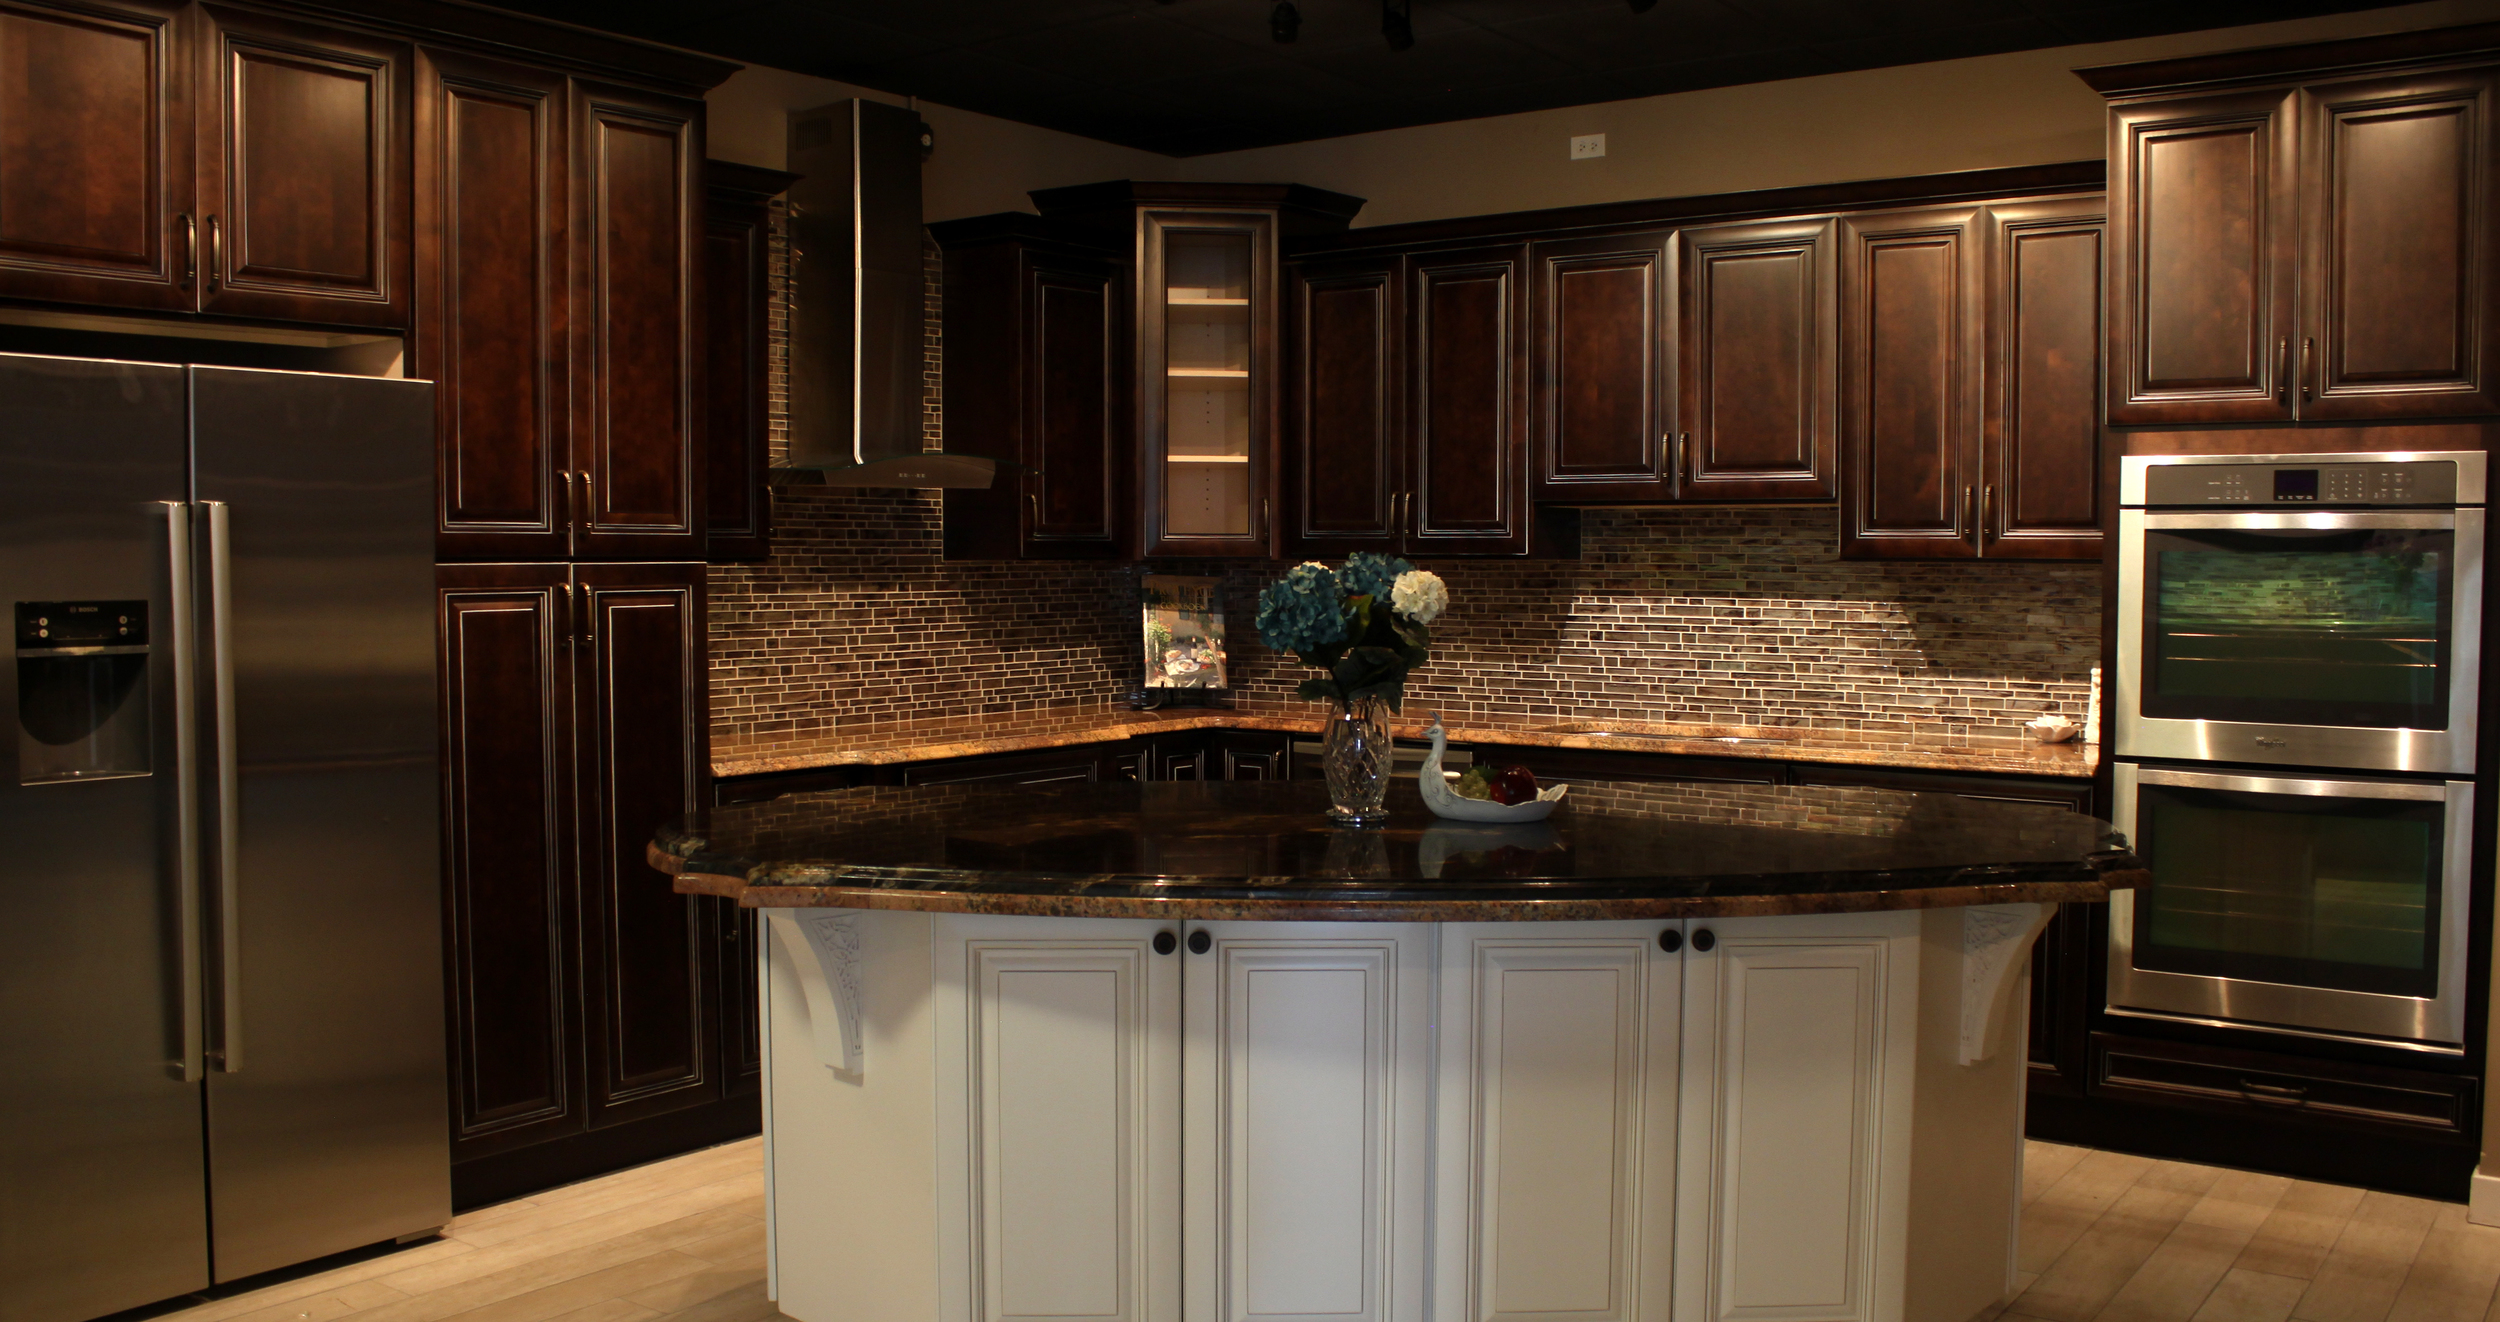 Algonquin Kitchen Cabinets Sinks And Countertops Rock Counter